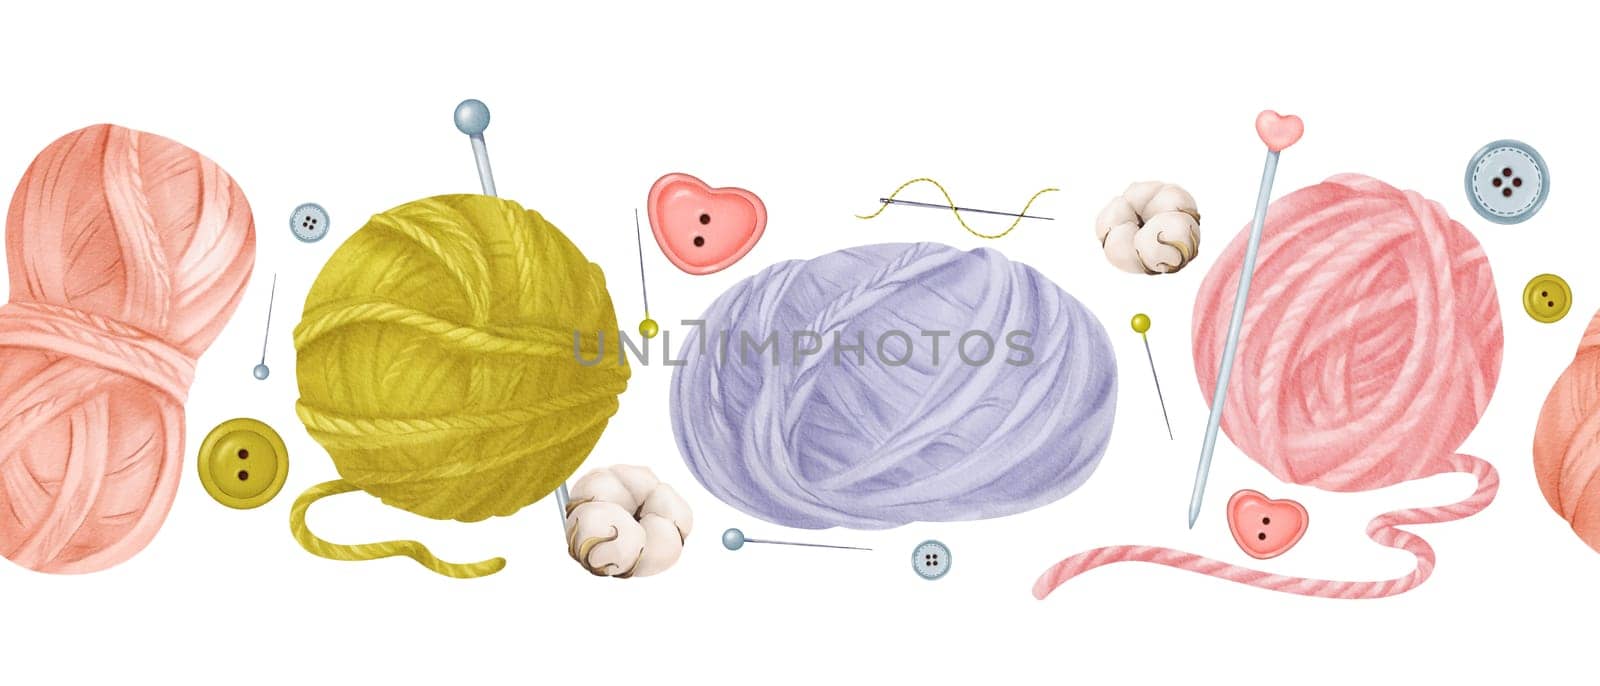 Seamless border with wool skeins, threads, buttons, cotton flower, knitting needles, and pins. Ideal for crafting blogs, knitting tutorials, or DIY-themed designs. Watercolor illustration.